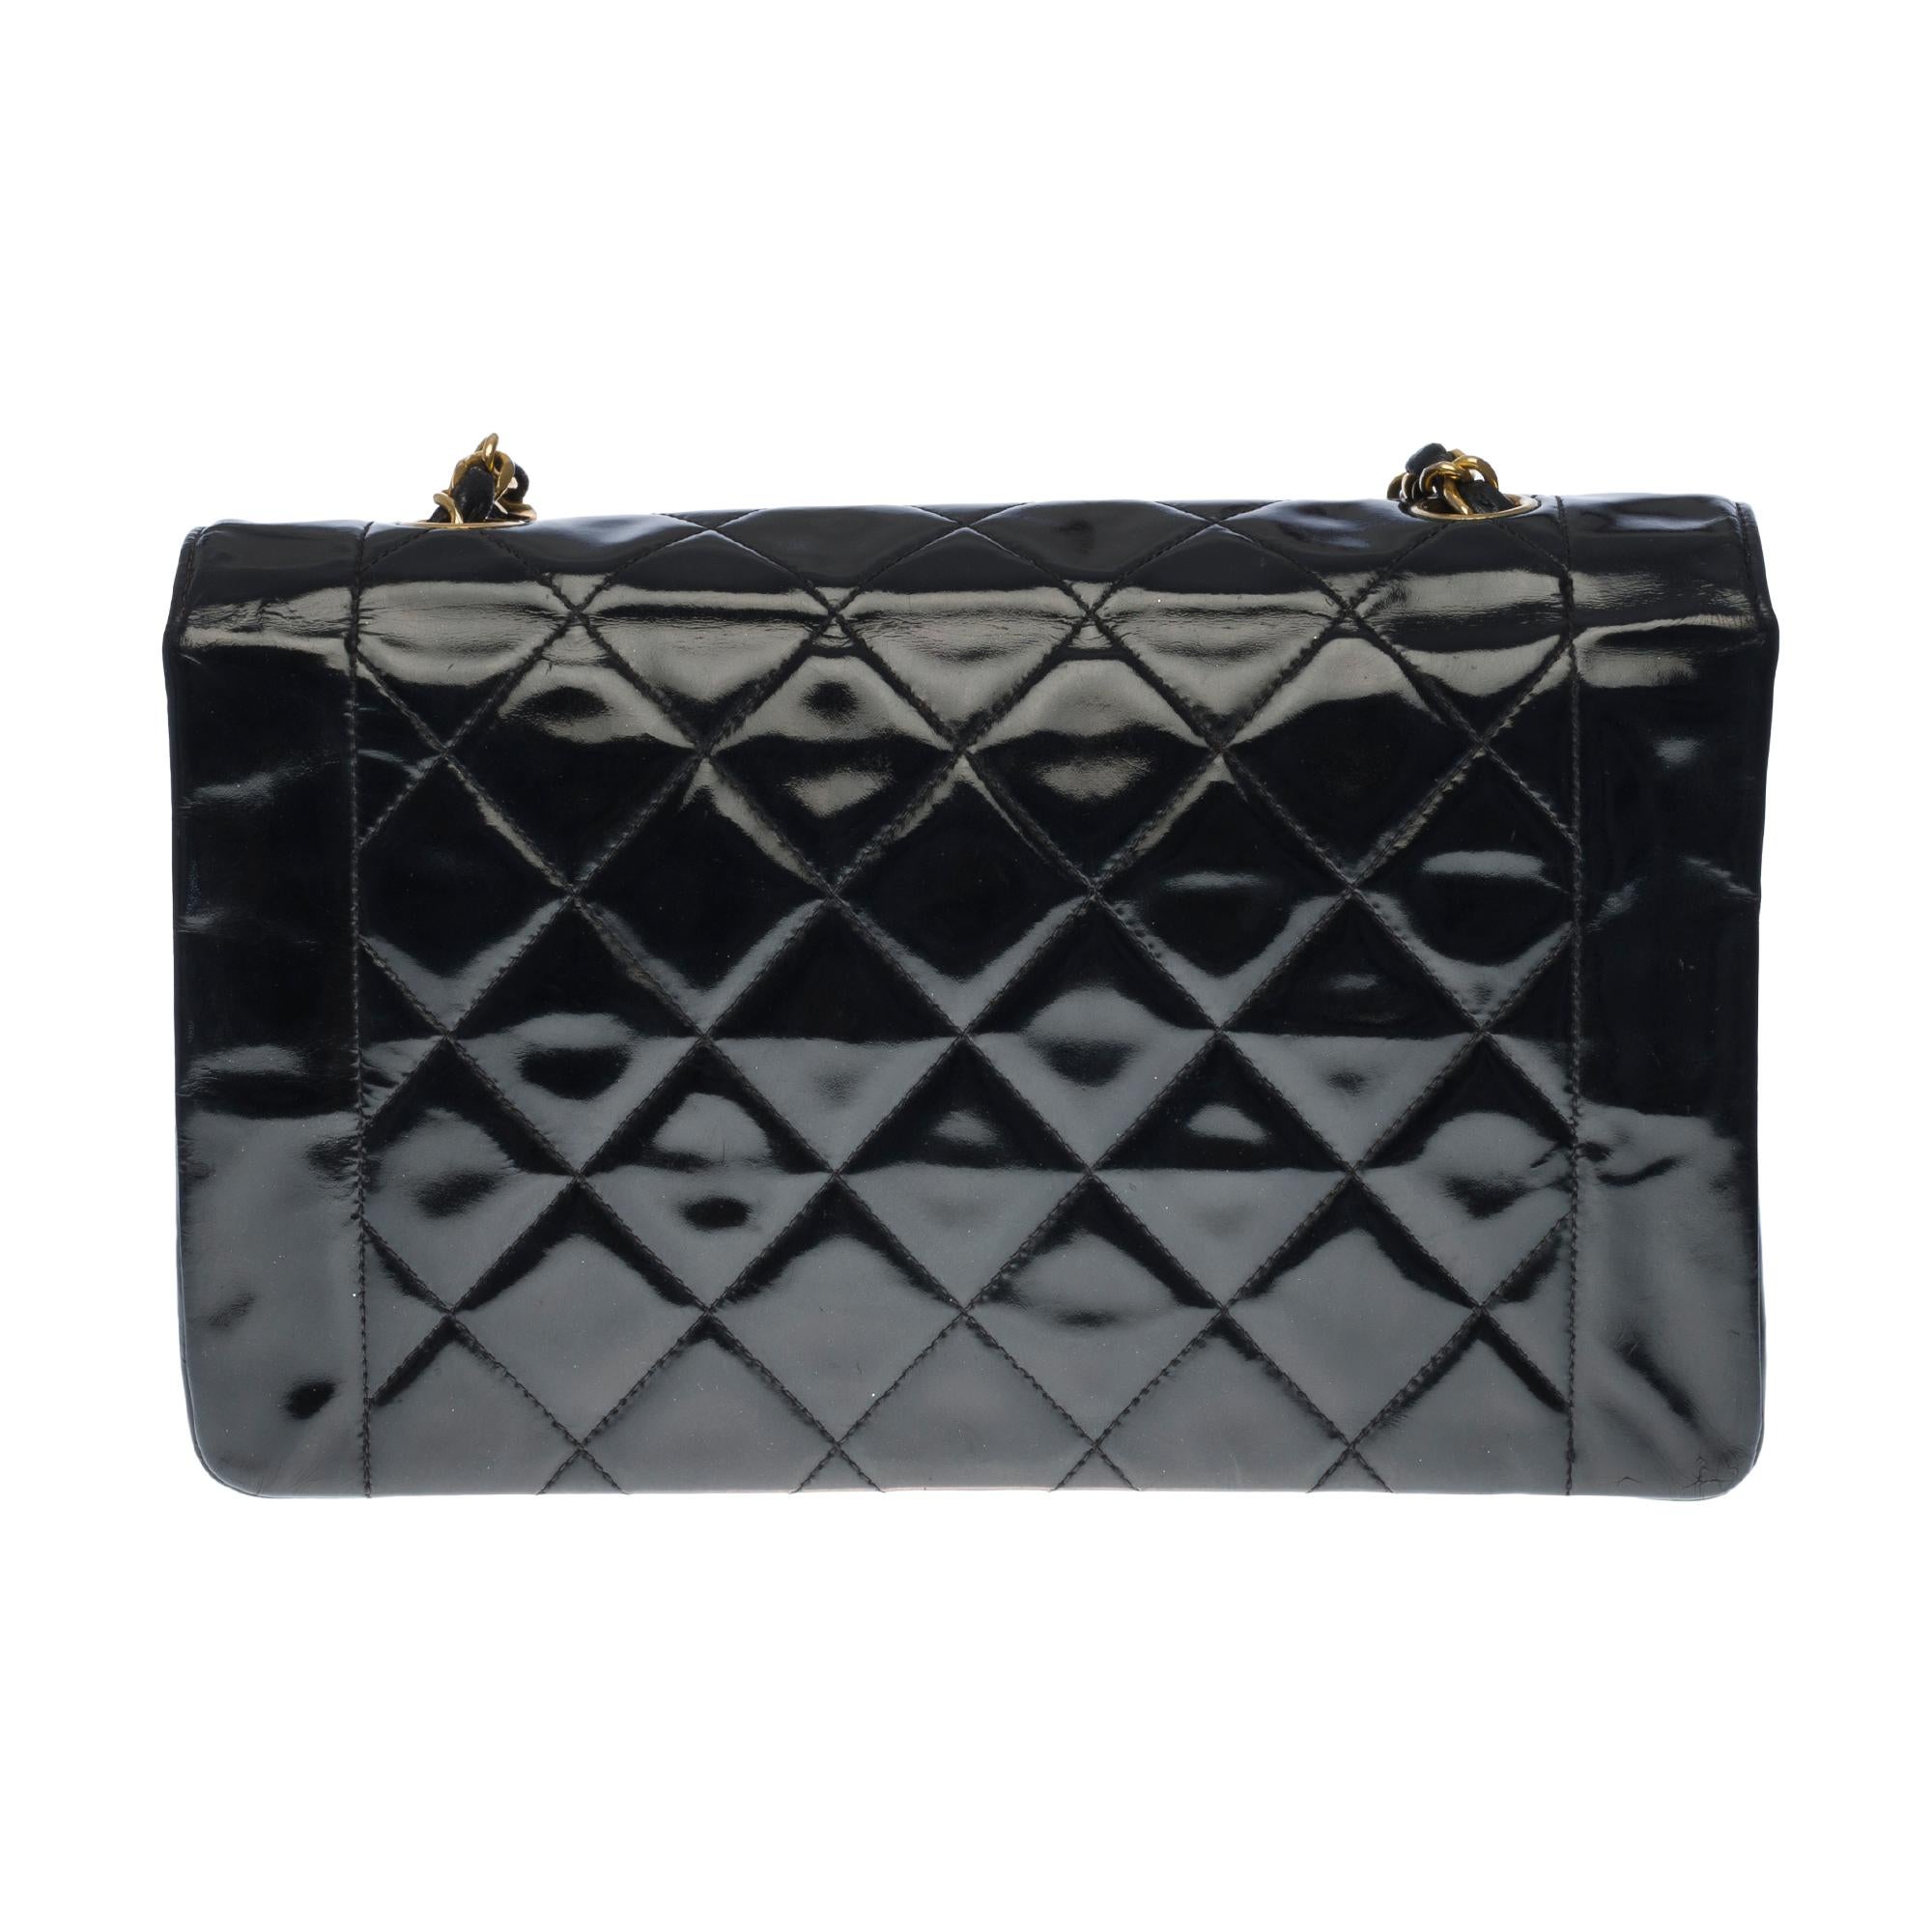 Black Stunning Chanel Diana Shoulder bag in black quilted patent leather and GHW